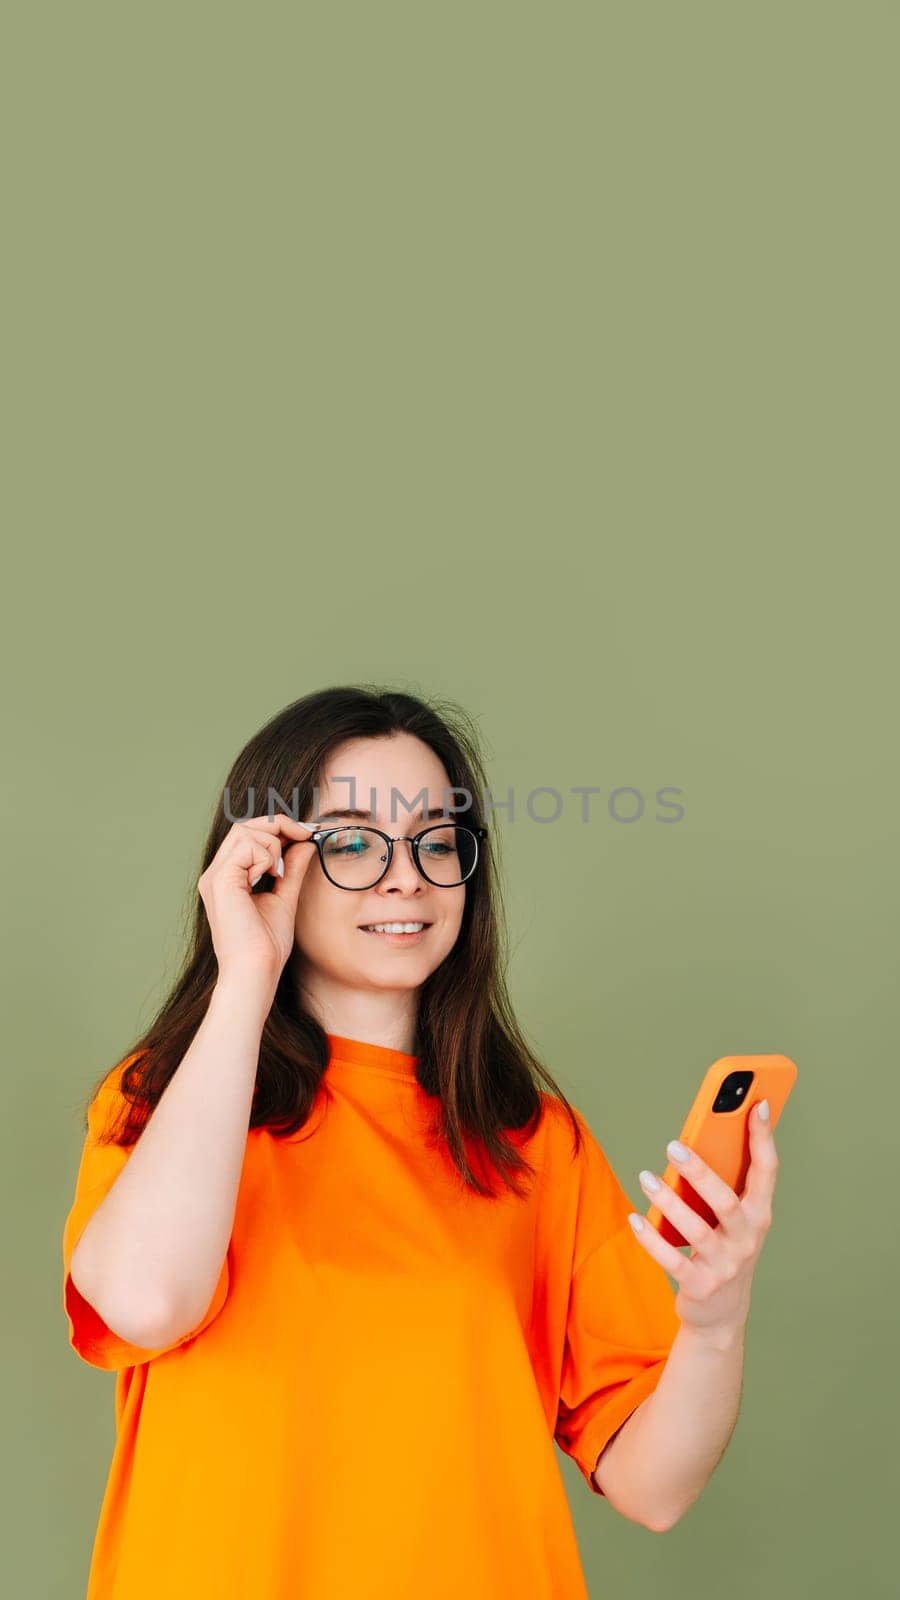 Picture of a cheerful young woman in an orange T-shirt using a modern smartphone in empty green space - technology and communication concept. isolated on green background with copy space for text.